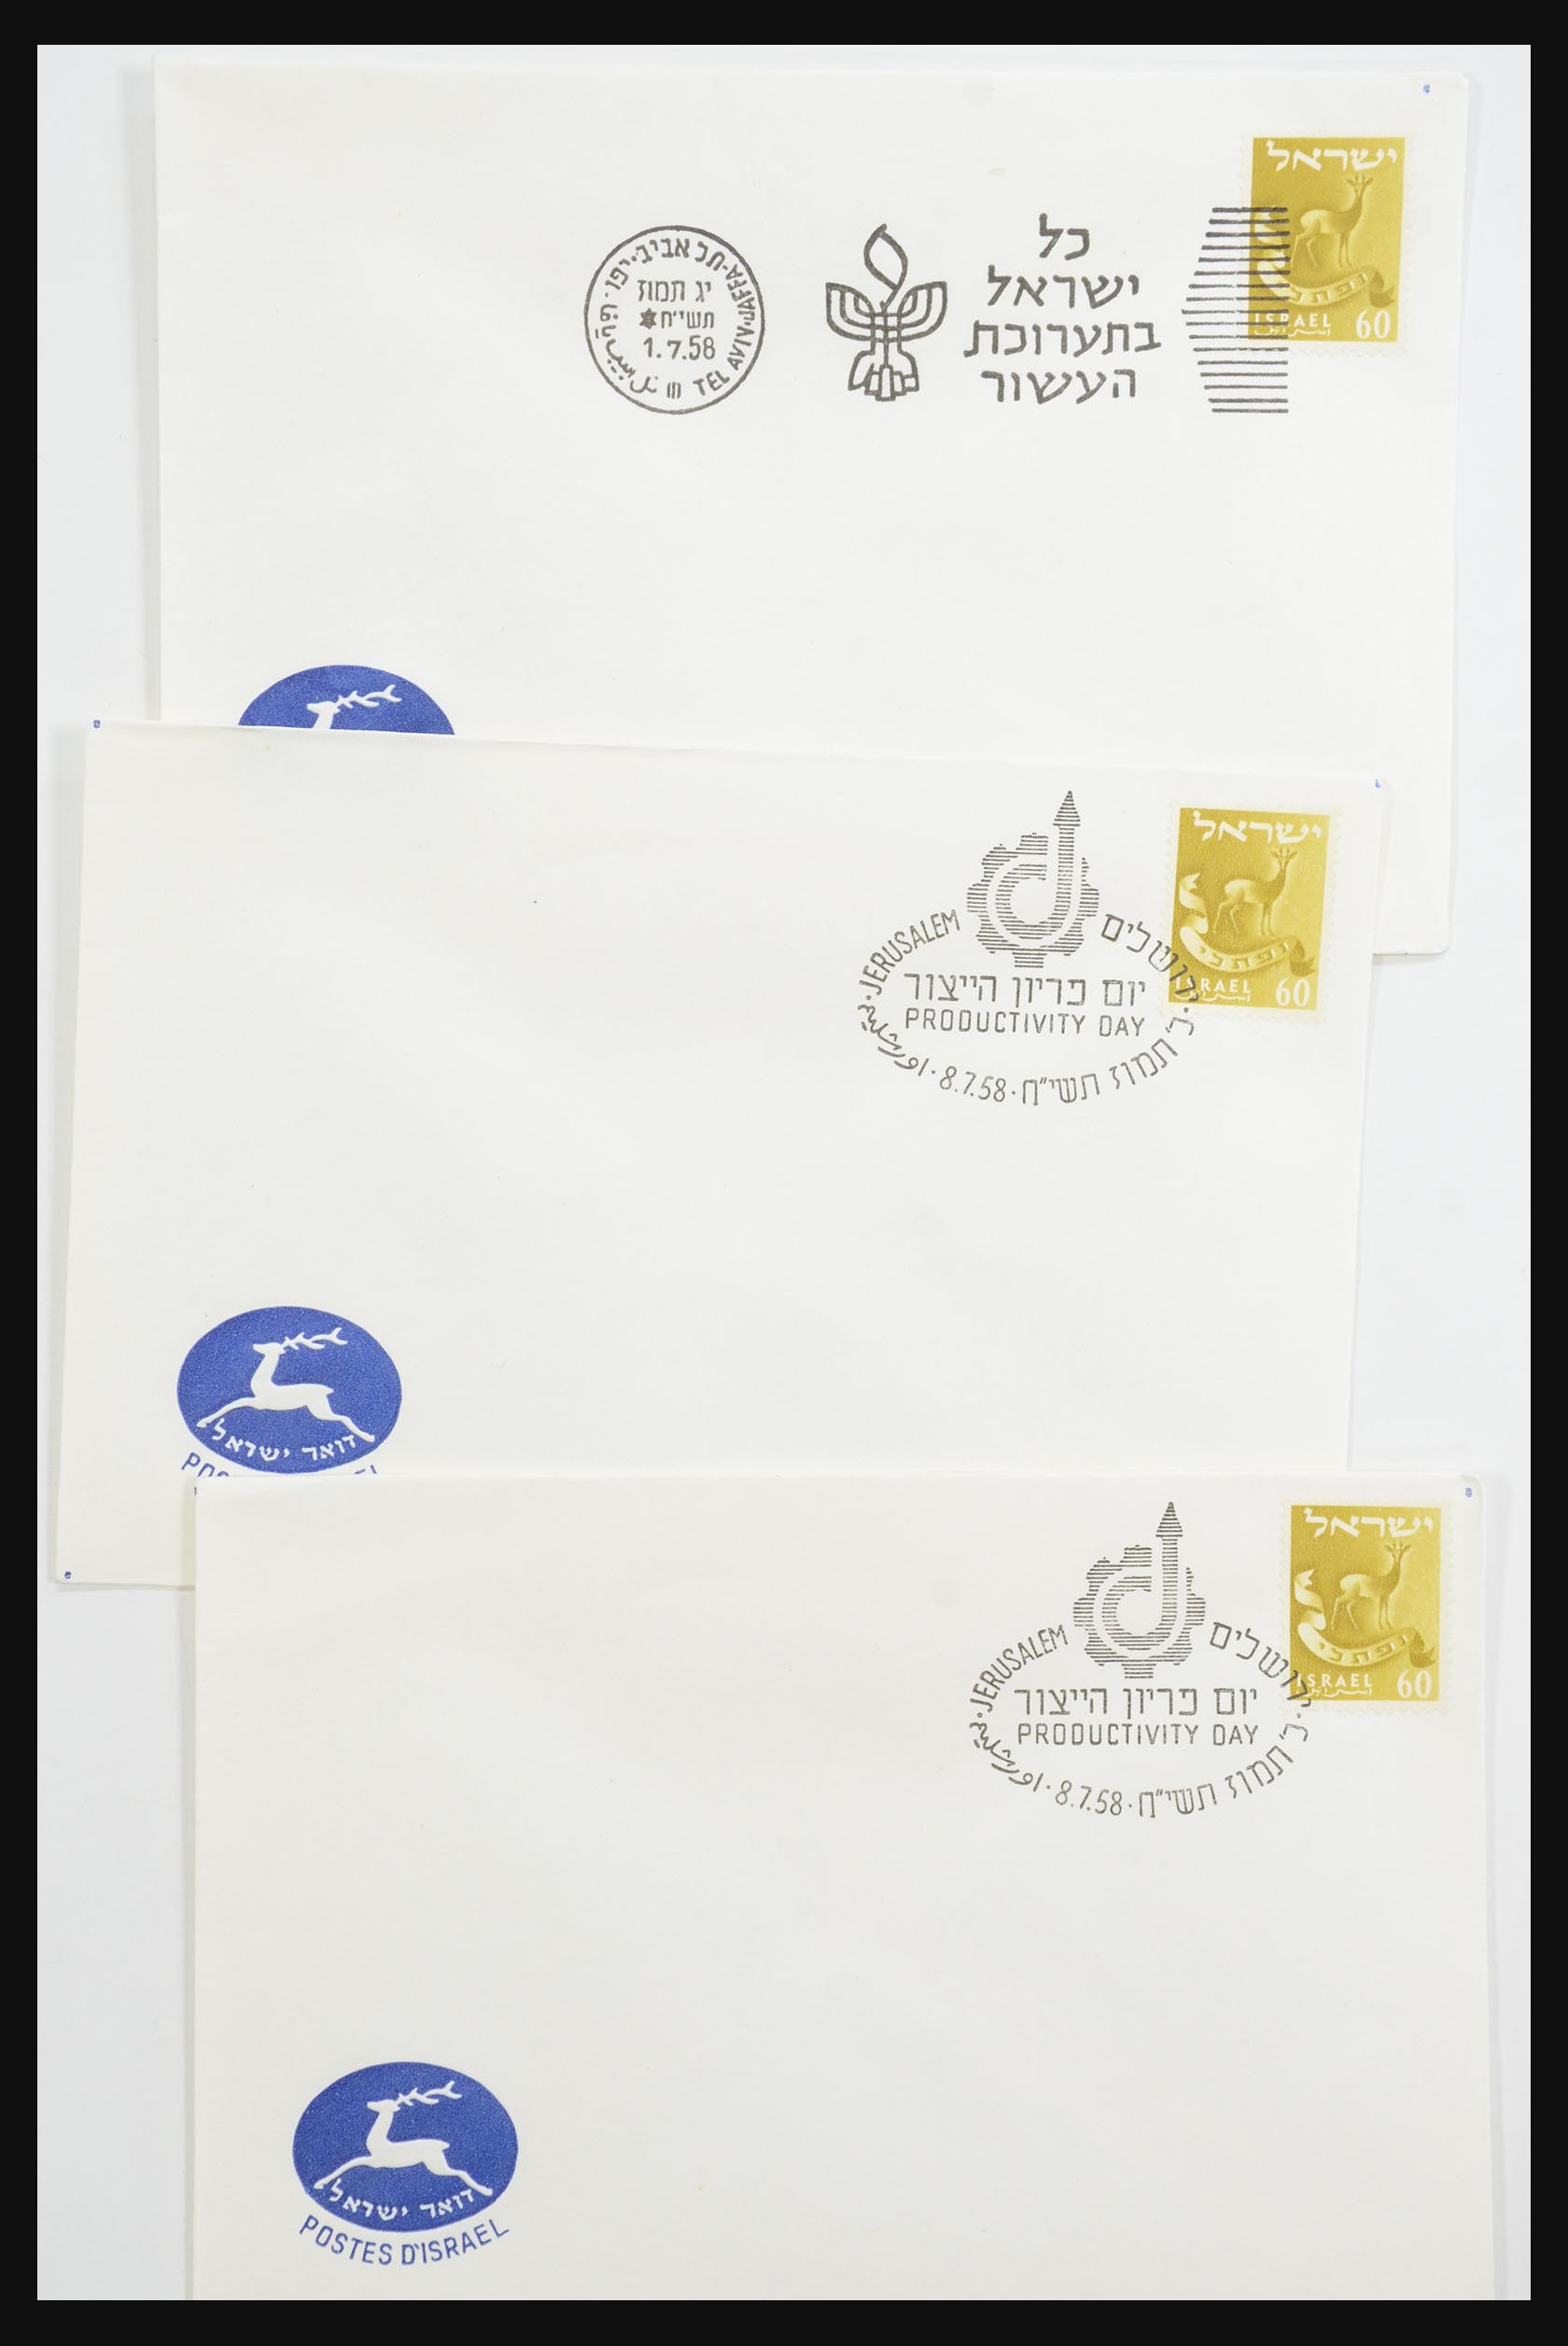 31924 075 - 31924 Israel first day cover collection 1957-2003.